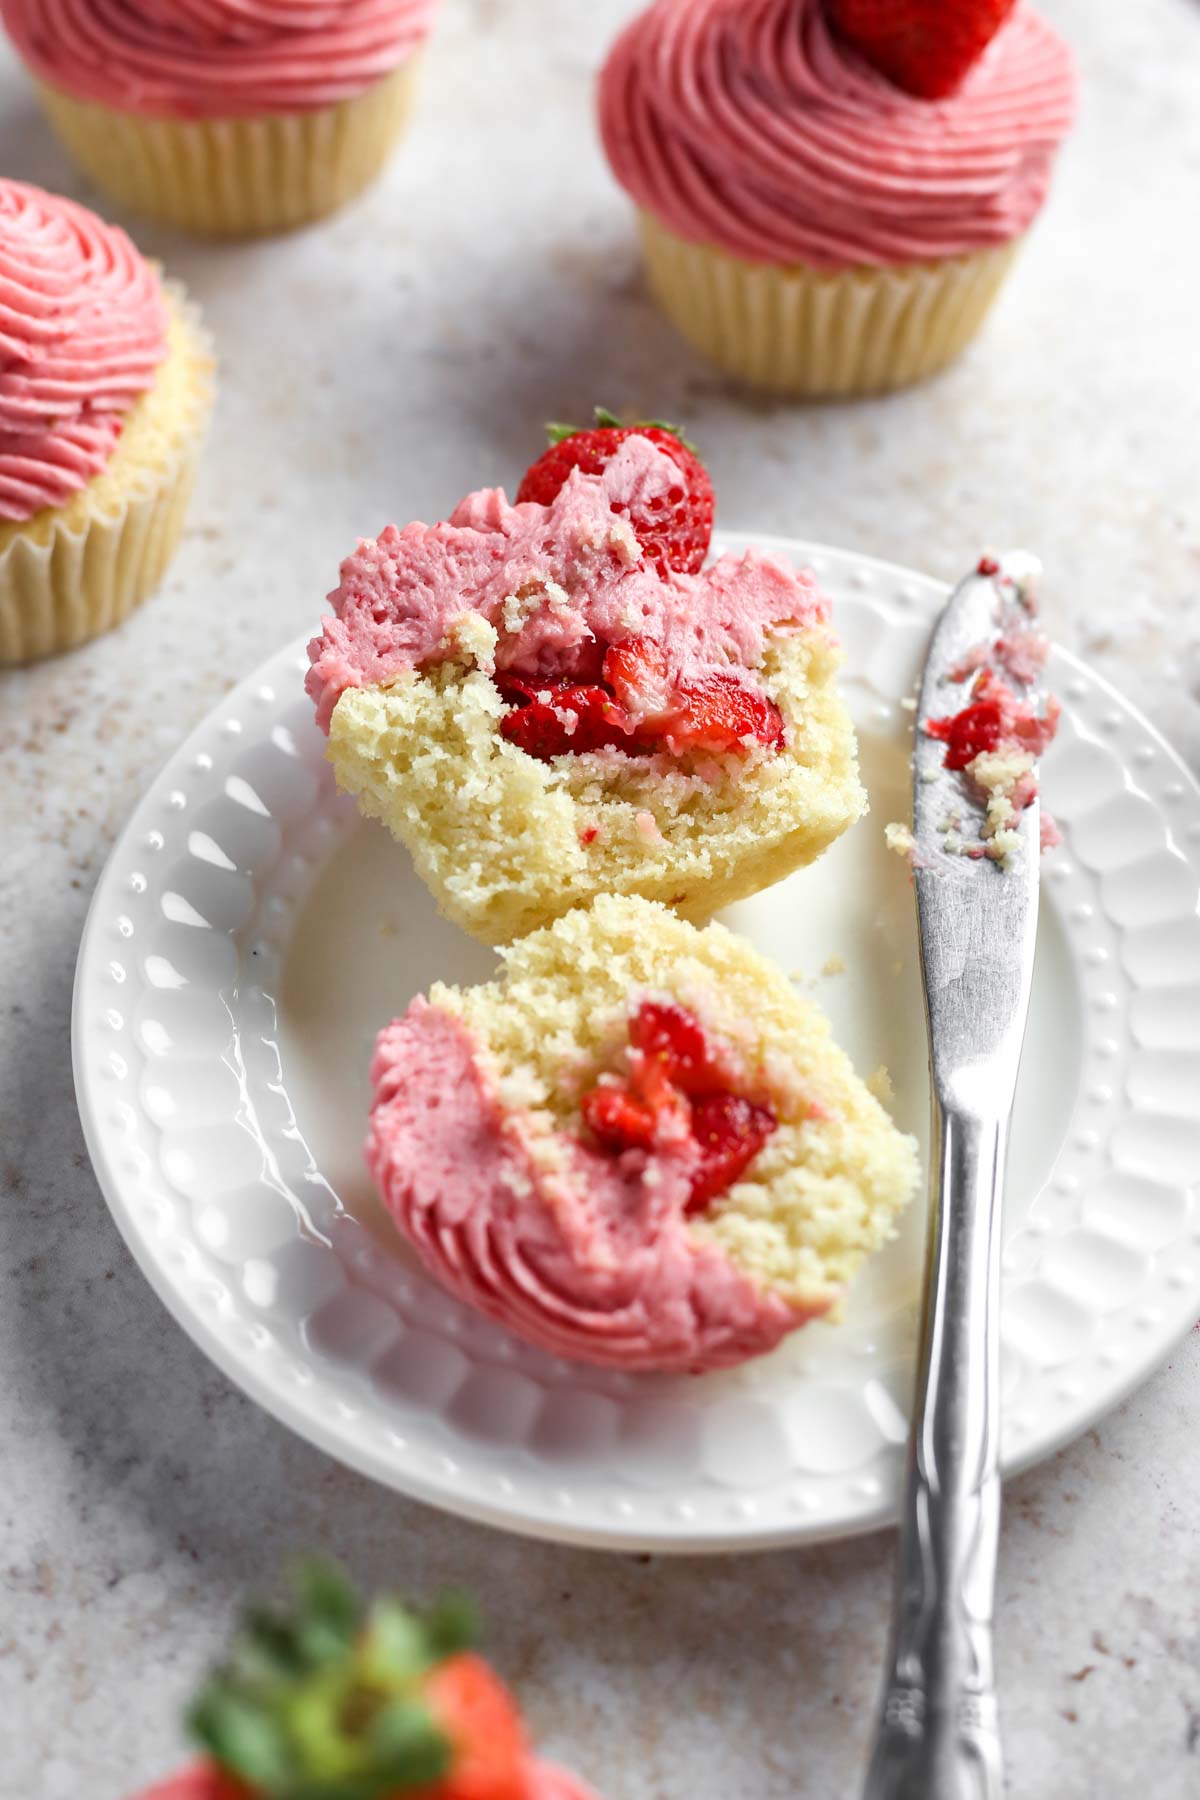 a strawberry filled cupcake sliced in half on a white dessert plate, showing the strawberry filling inside.